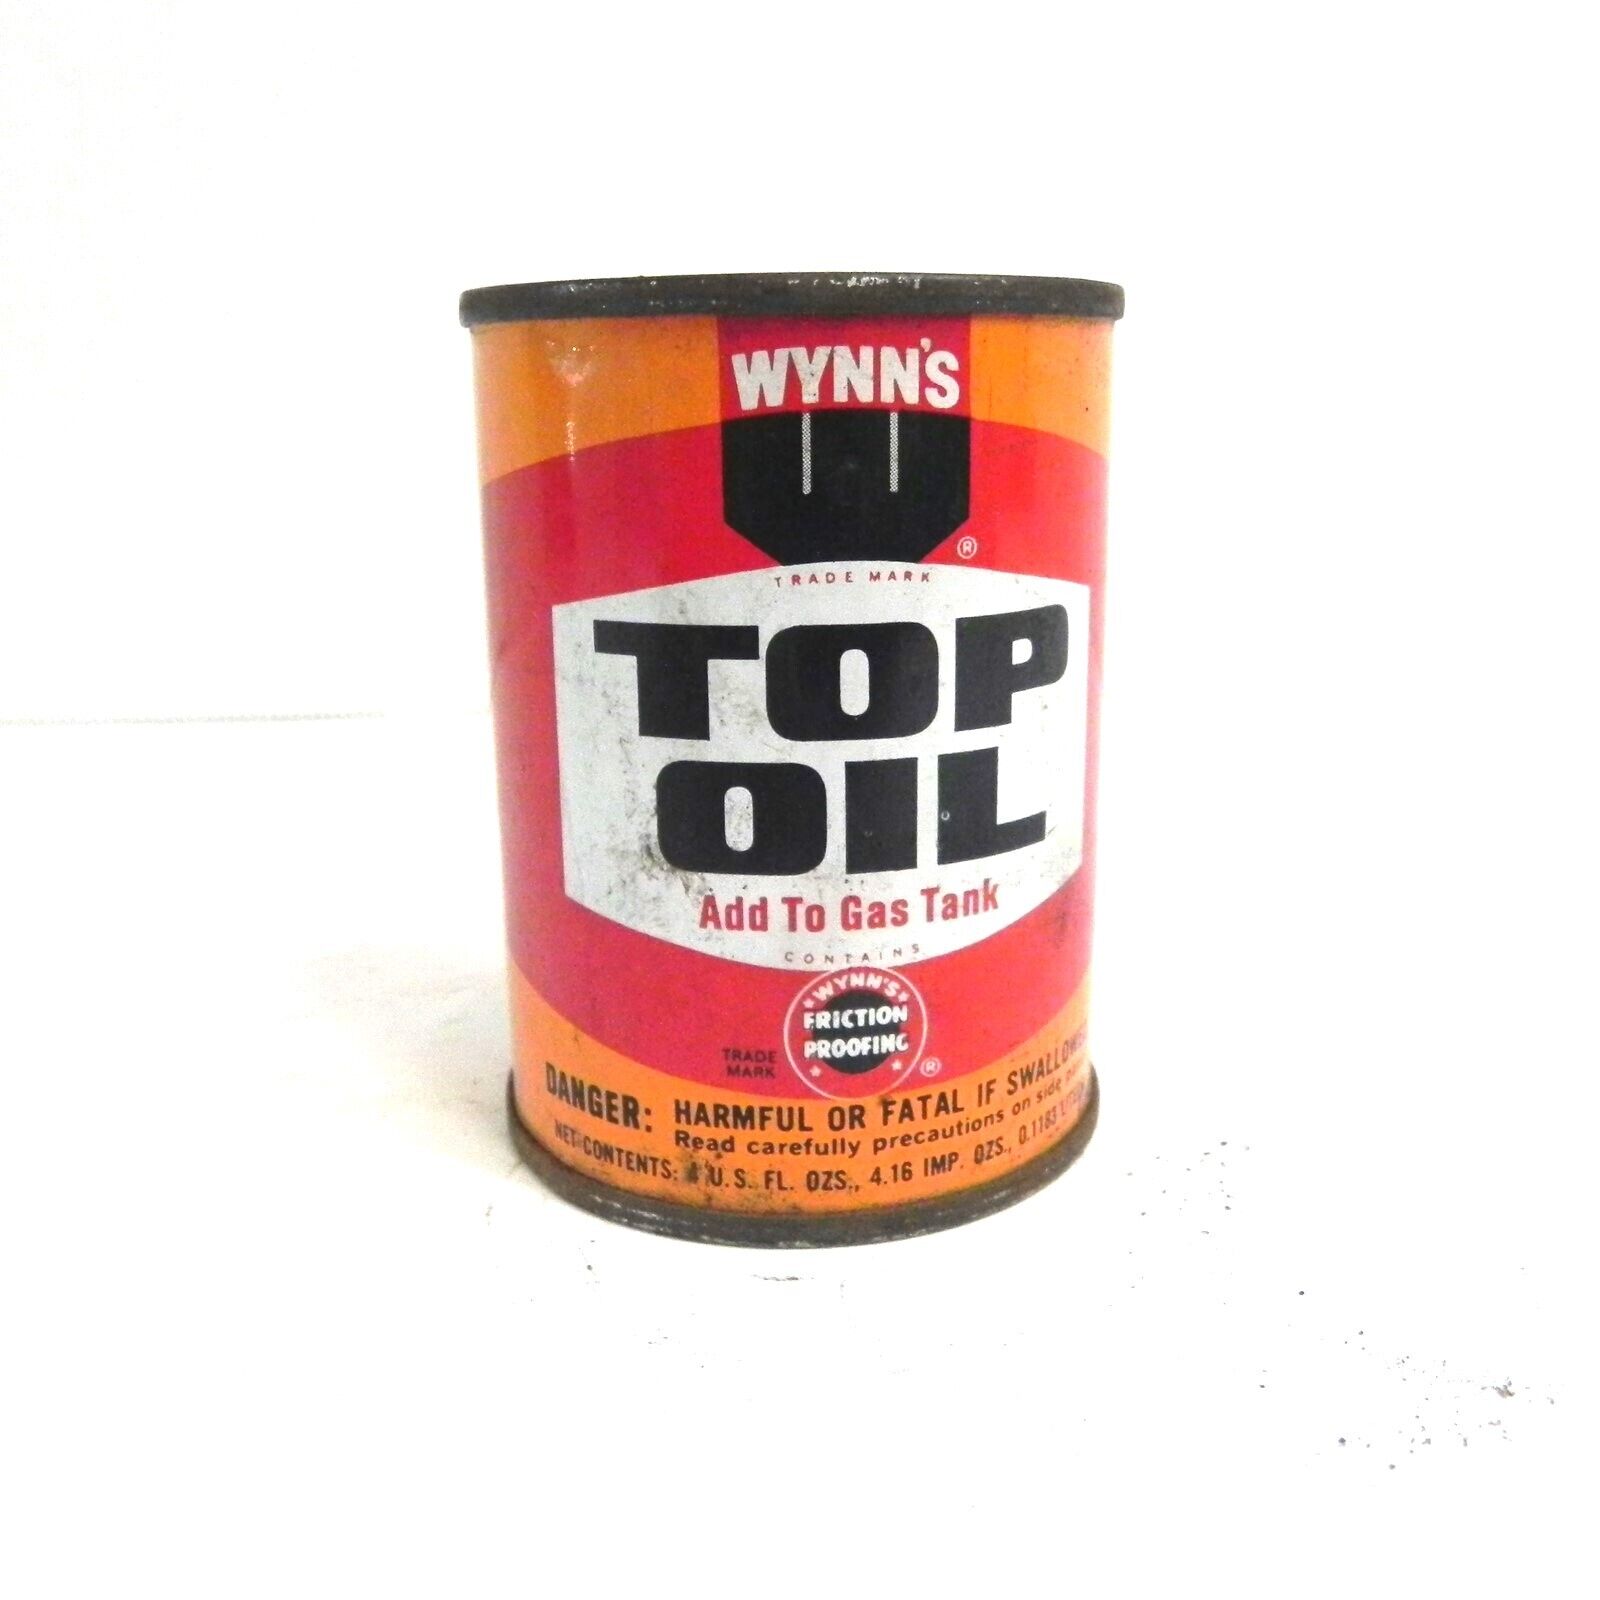 VINTAGE WYNN'S TOP OIL GAS TANK ADDITIVE 4 FL OZ FULL PRE OWNED USED OIL CAN VTG